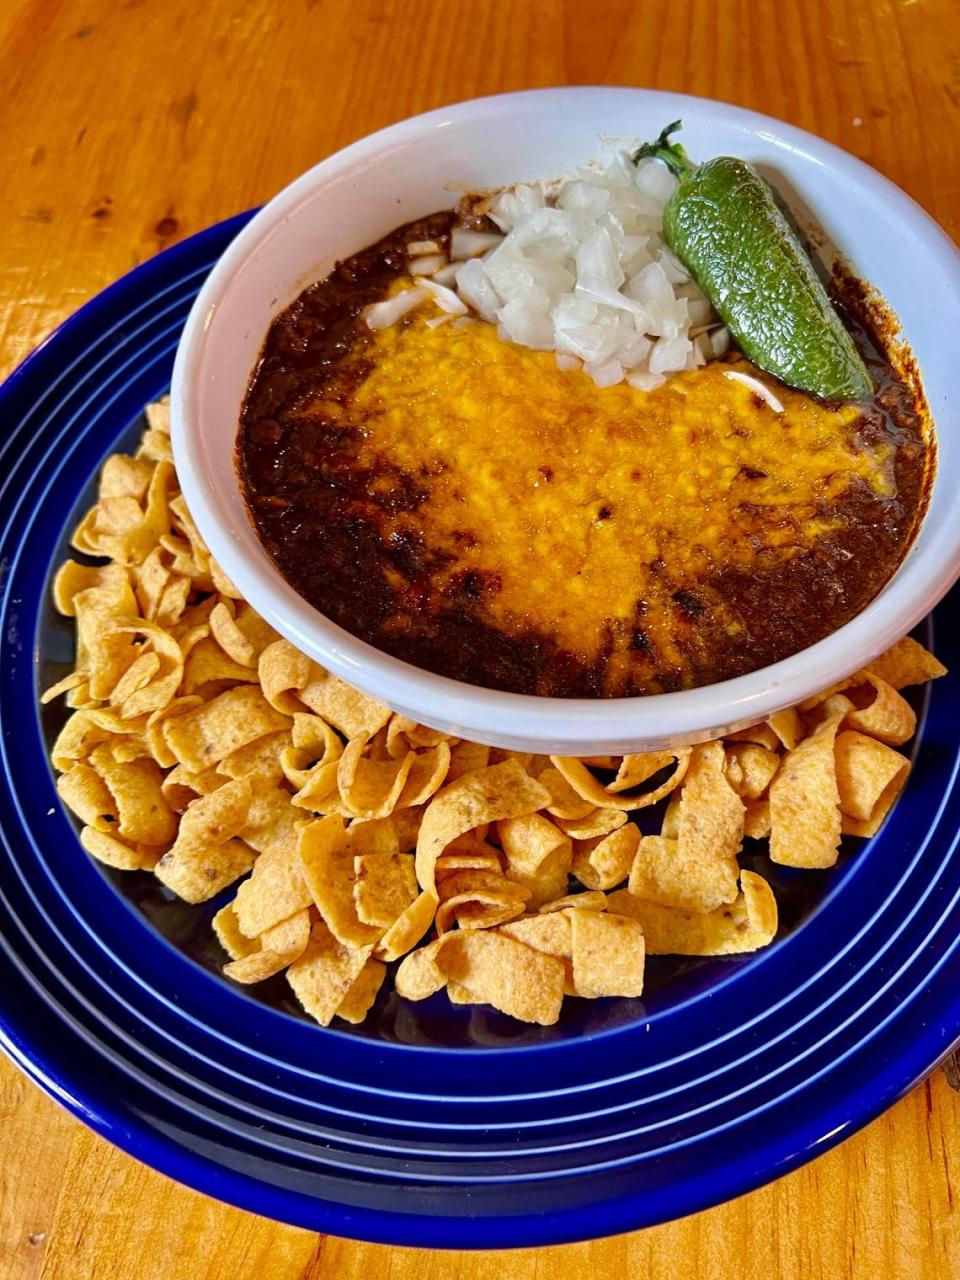 Fred’s Texas Cafe has served chili in winter since 1978 and now serves brisket chili con carne year-round.